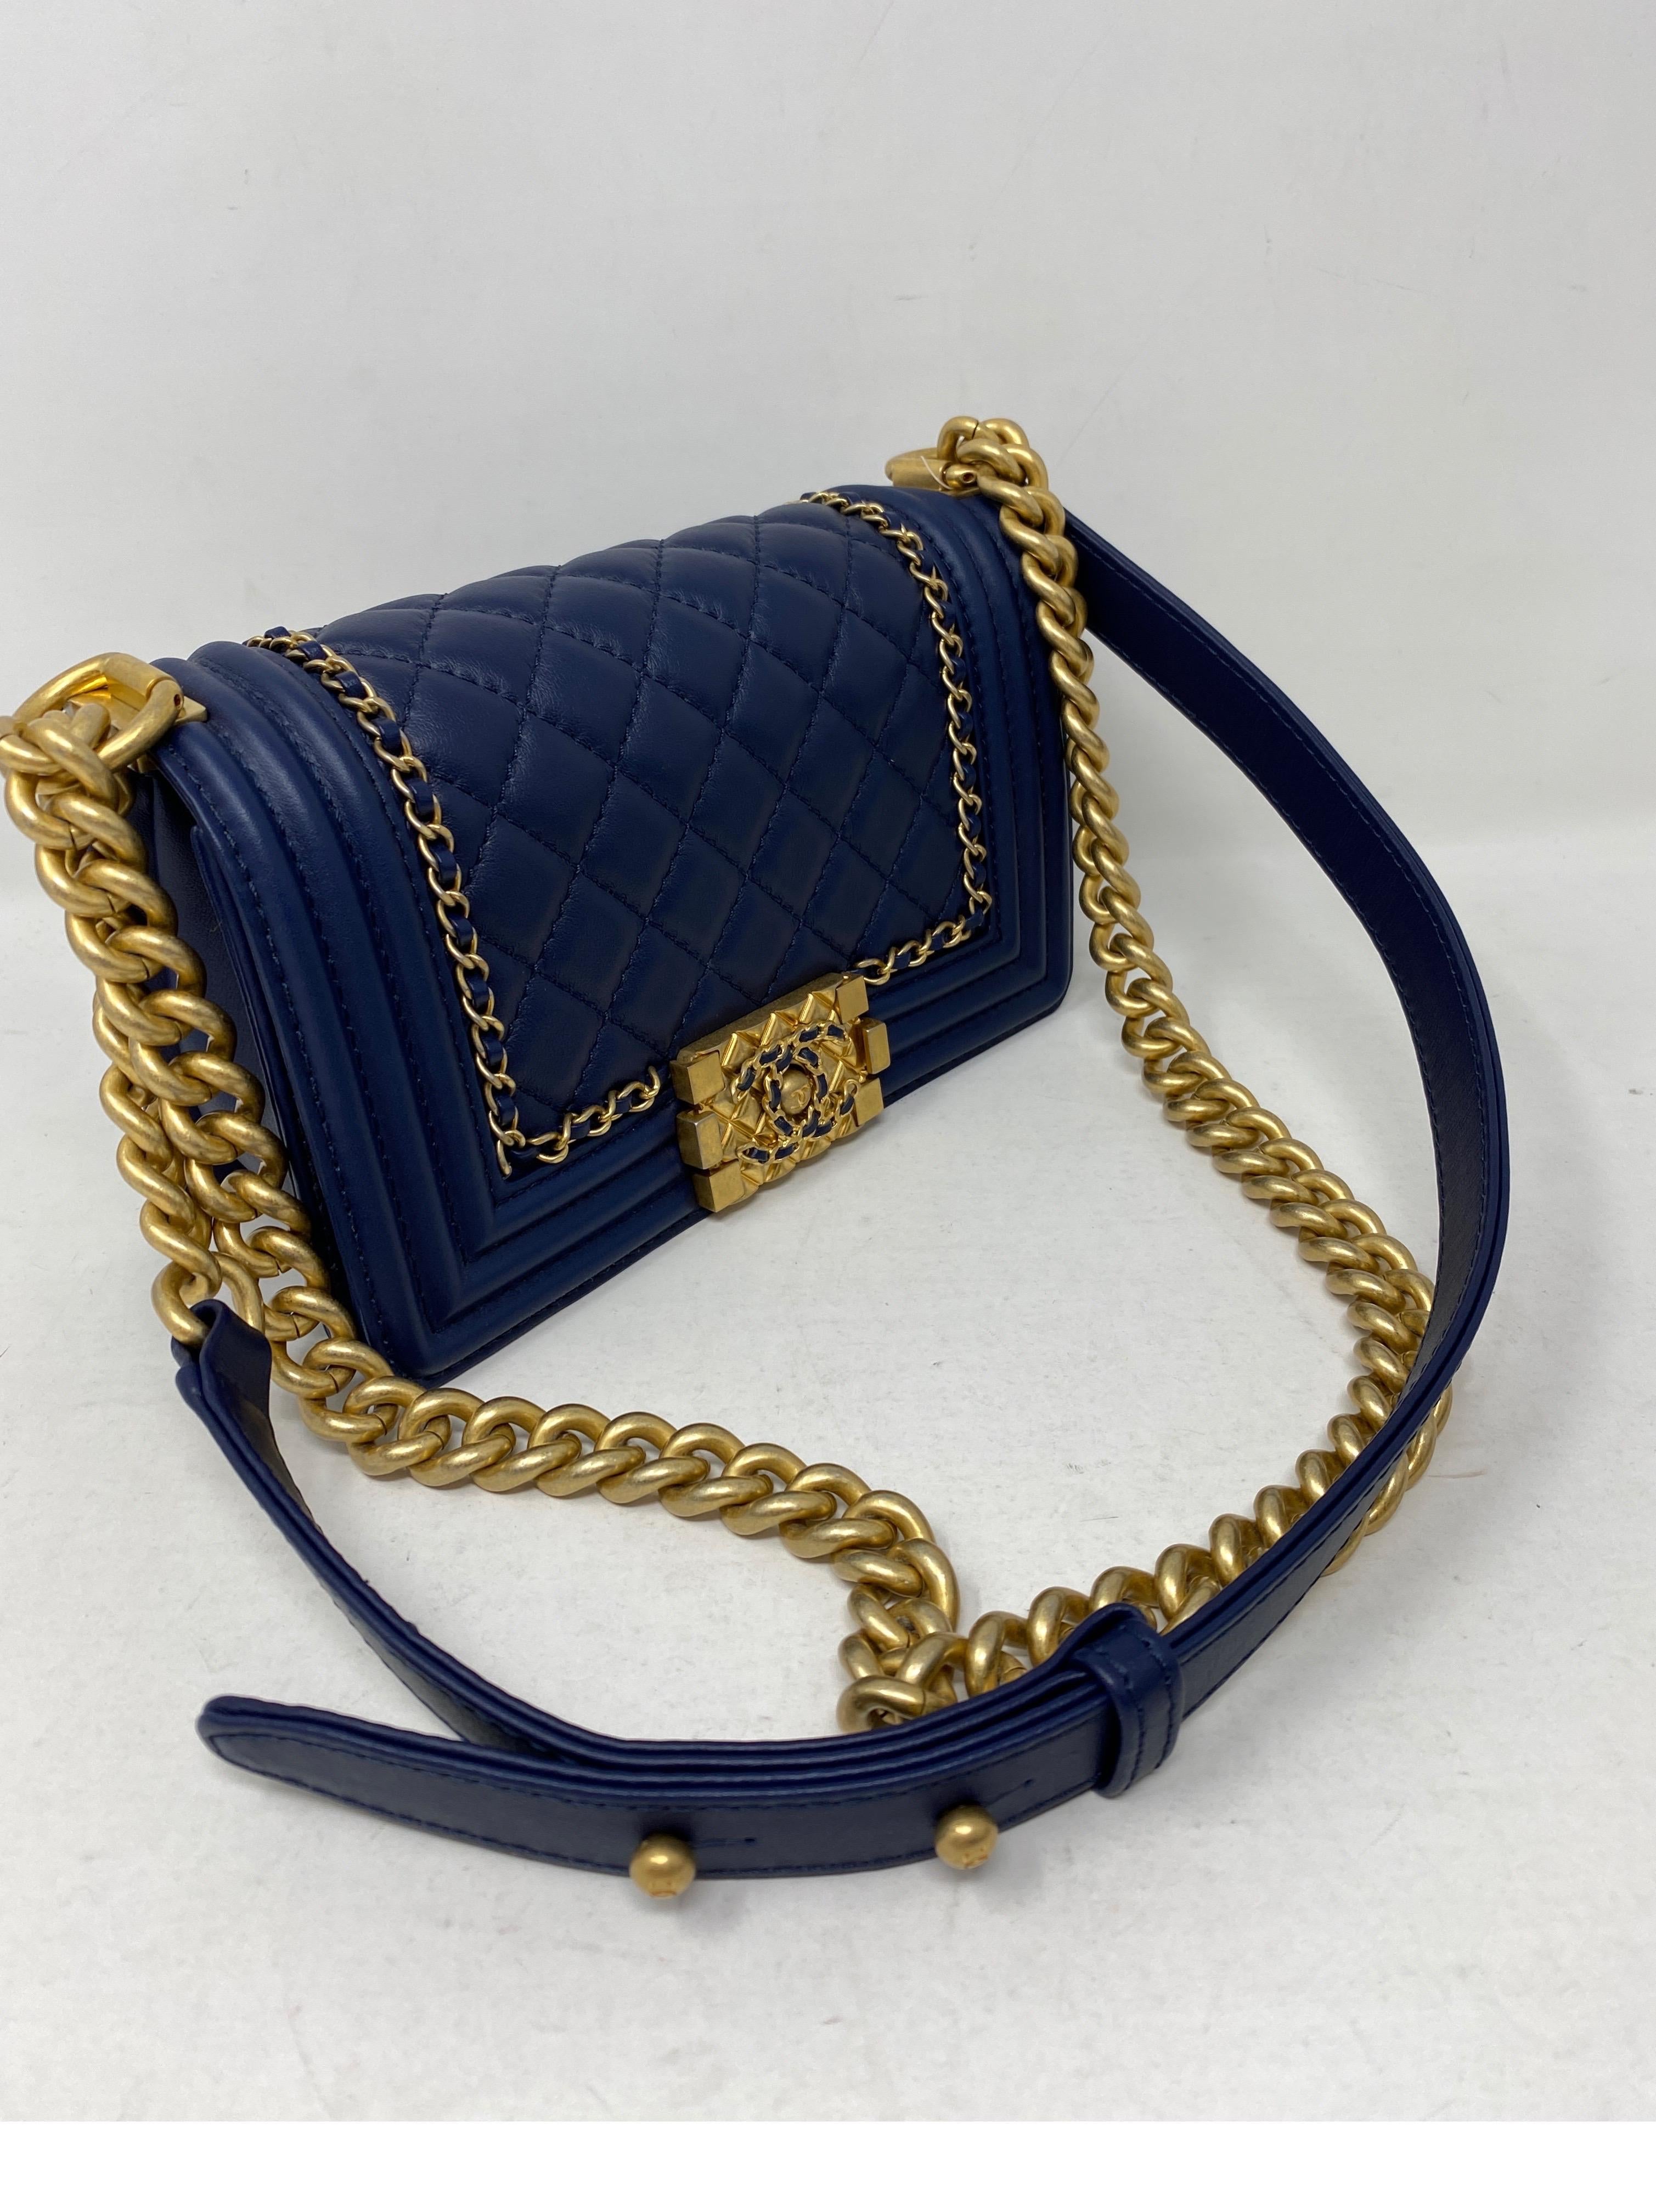 Chanel Navy Limited Edition Mini Boy. Rare gold chain details and unique clasp. Mint condition. Like new. Stunning blue bag. Gold hardware. Includes authenticity card and dust cover. Guaranteed authentic.